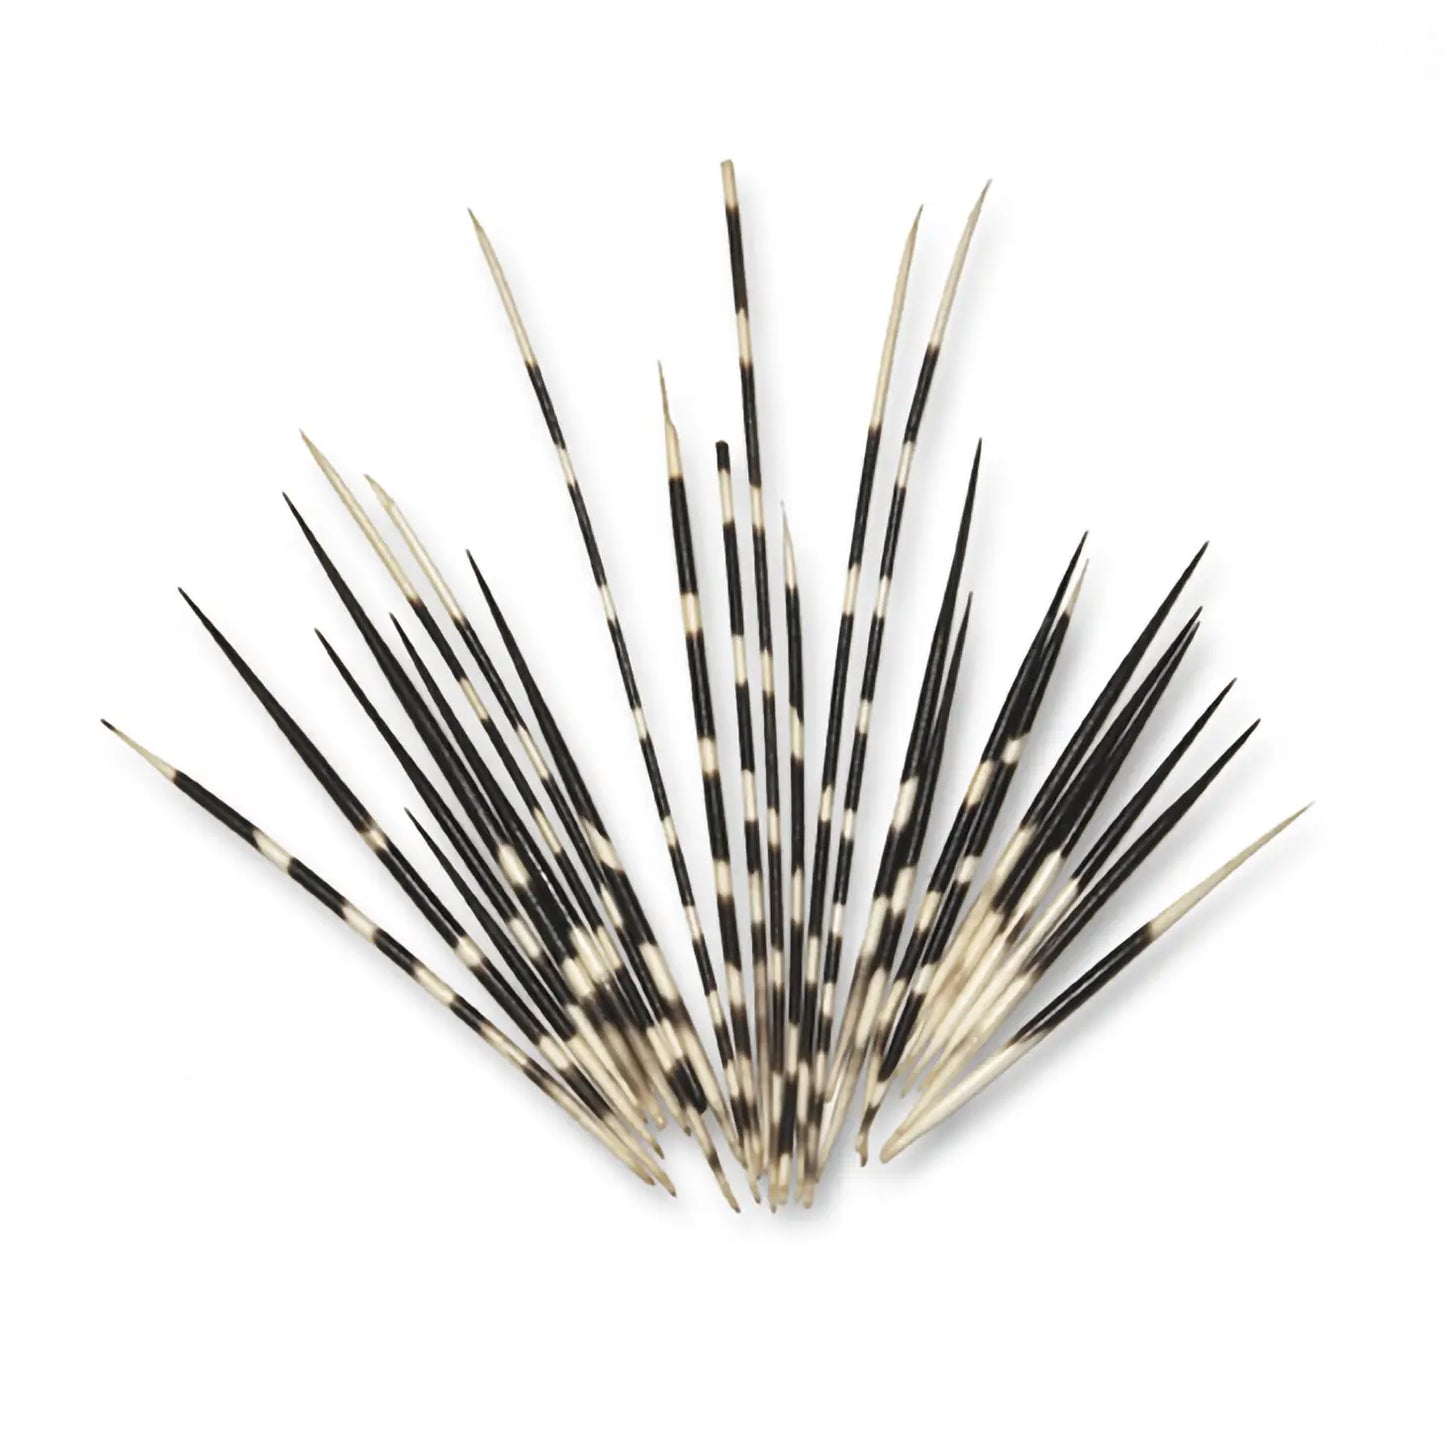 South African Porcupine Quills - Set of 15